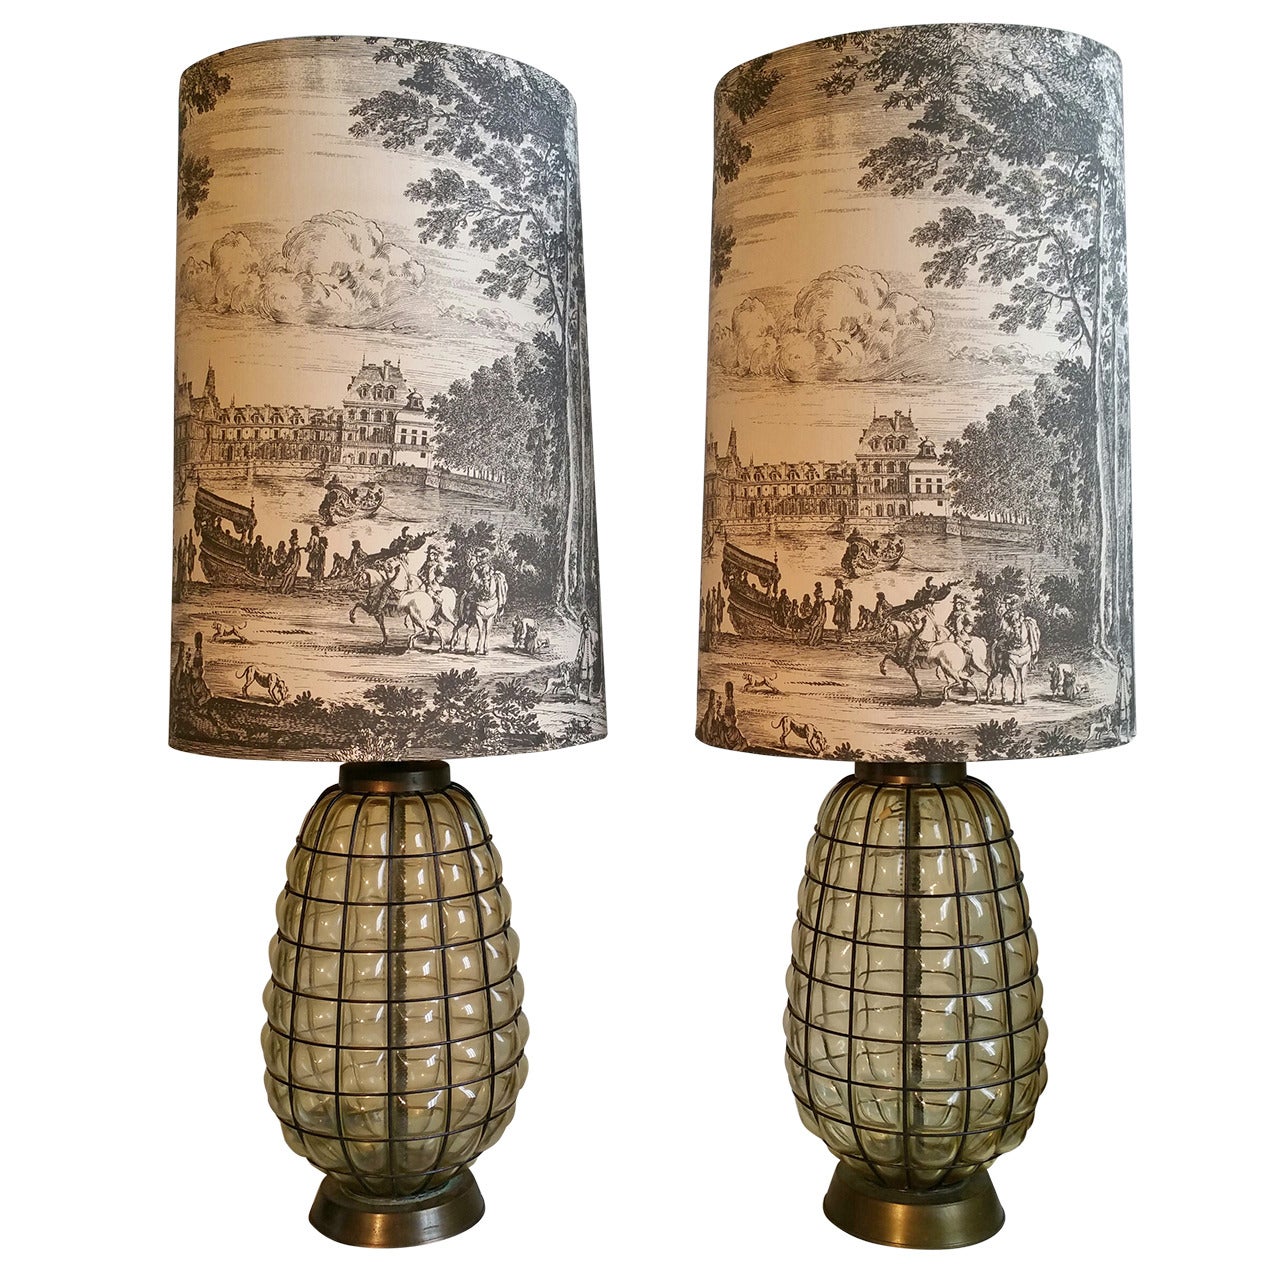 Pair of Blown Glass and Wire Lamps with Original Decorated Toile Fabric Shades